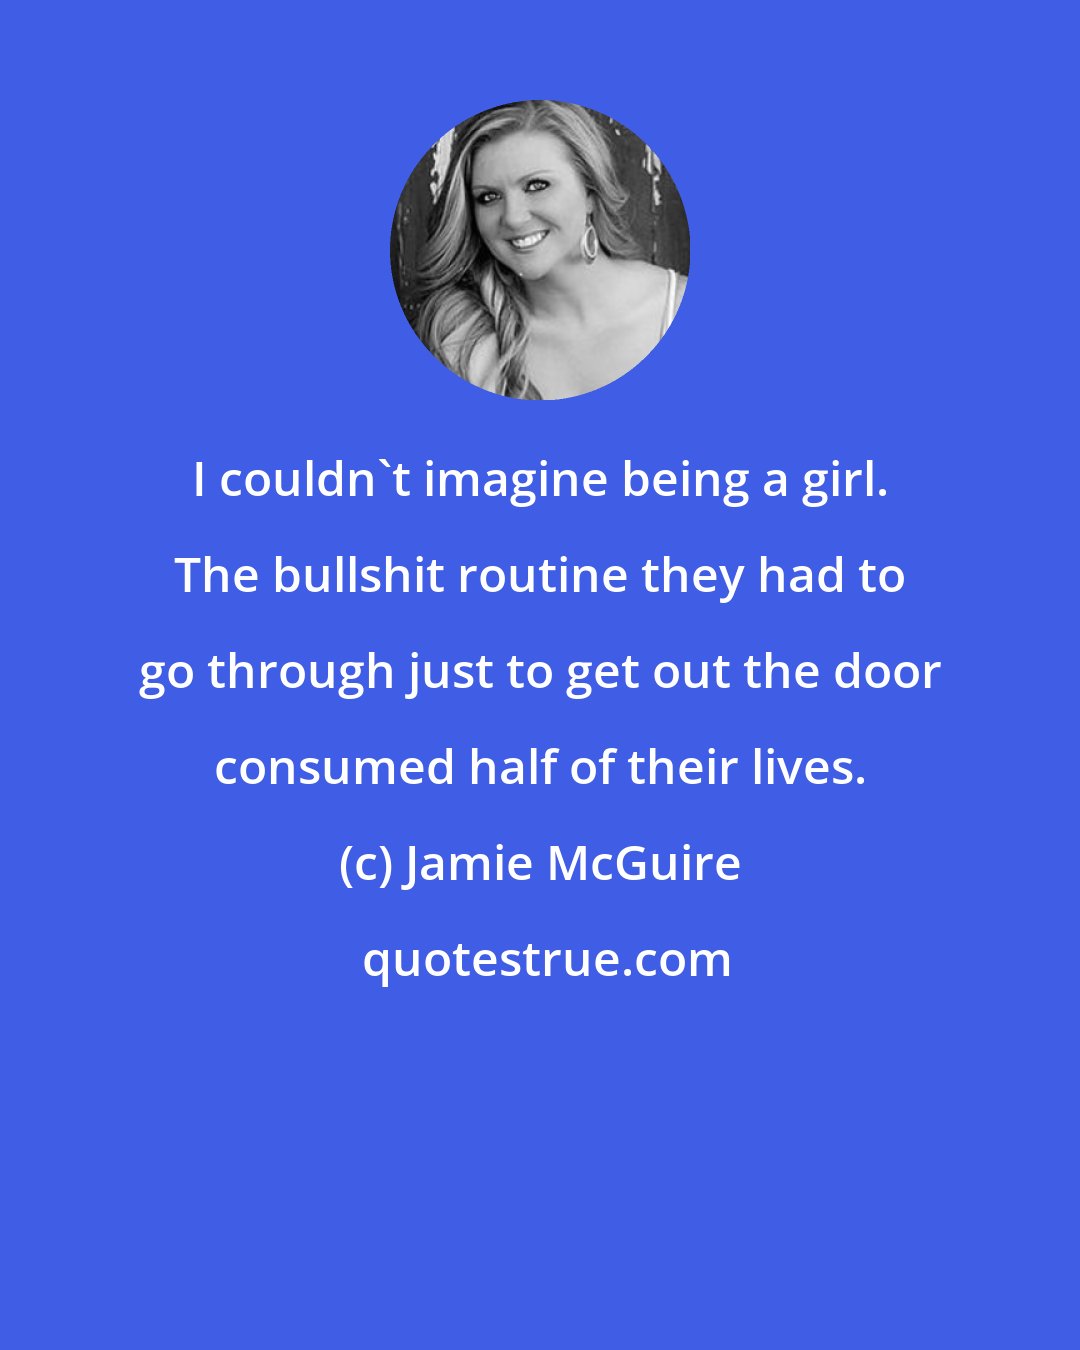 Jamie McGuire: I couldn't imagine being a girl. The bullshit routine they had to go through just to get out the door consumed half of their lives.